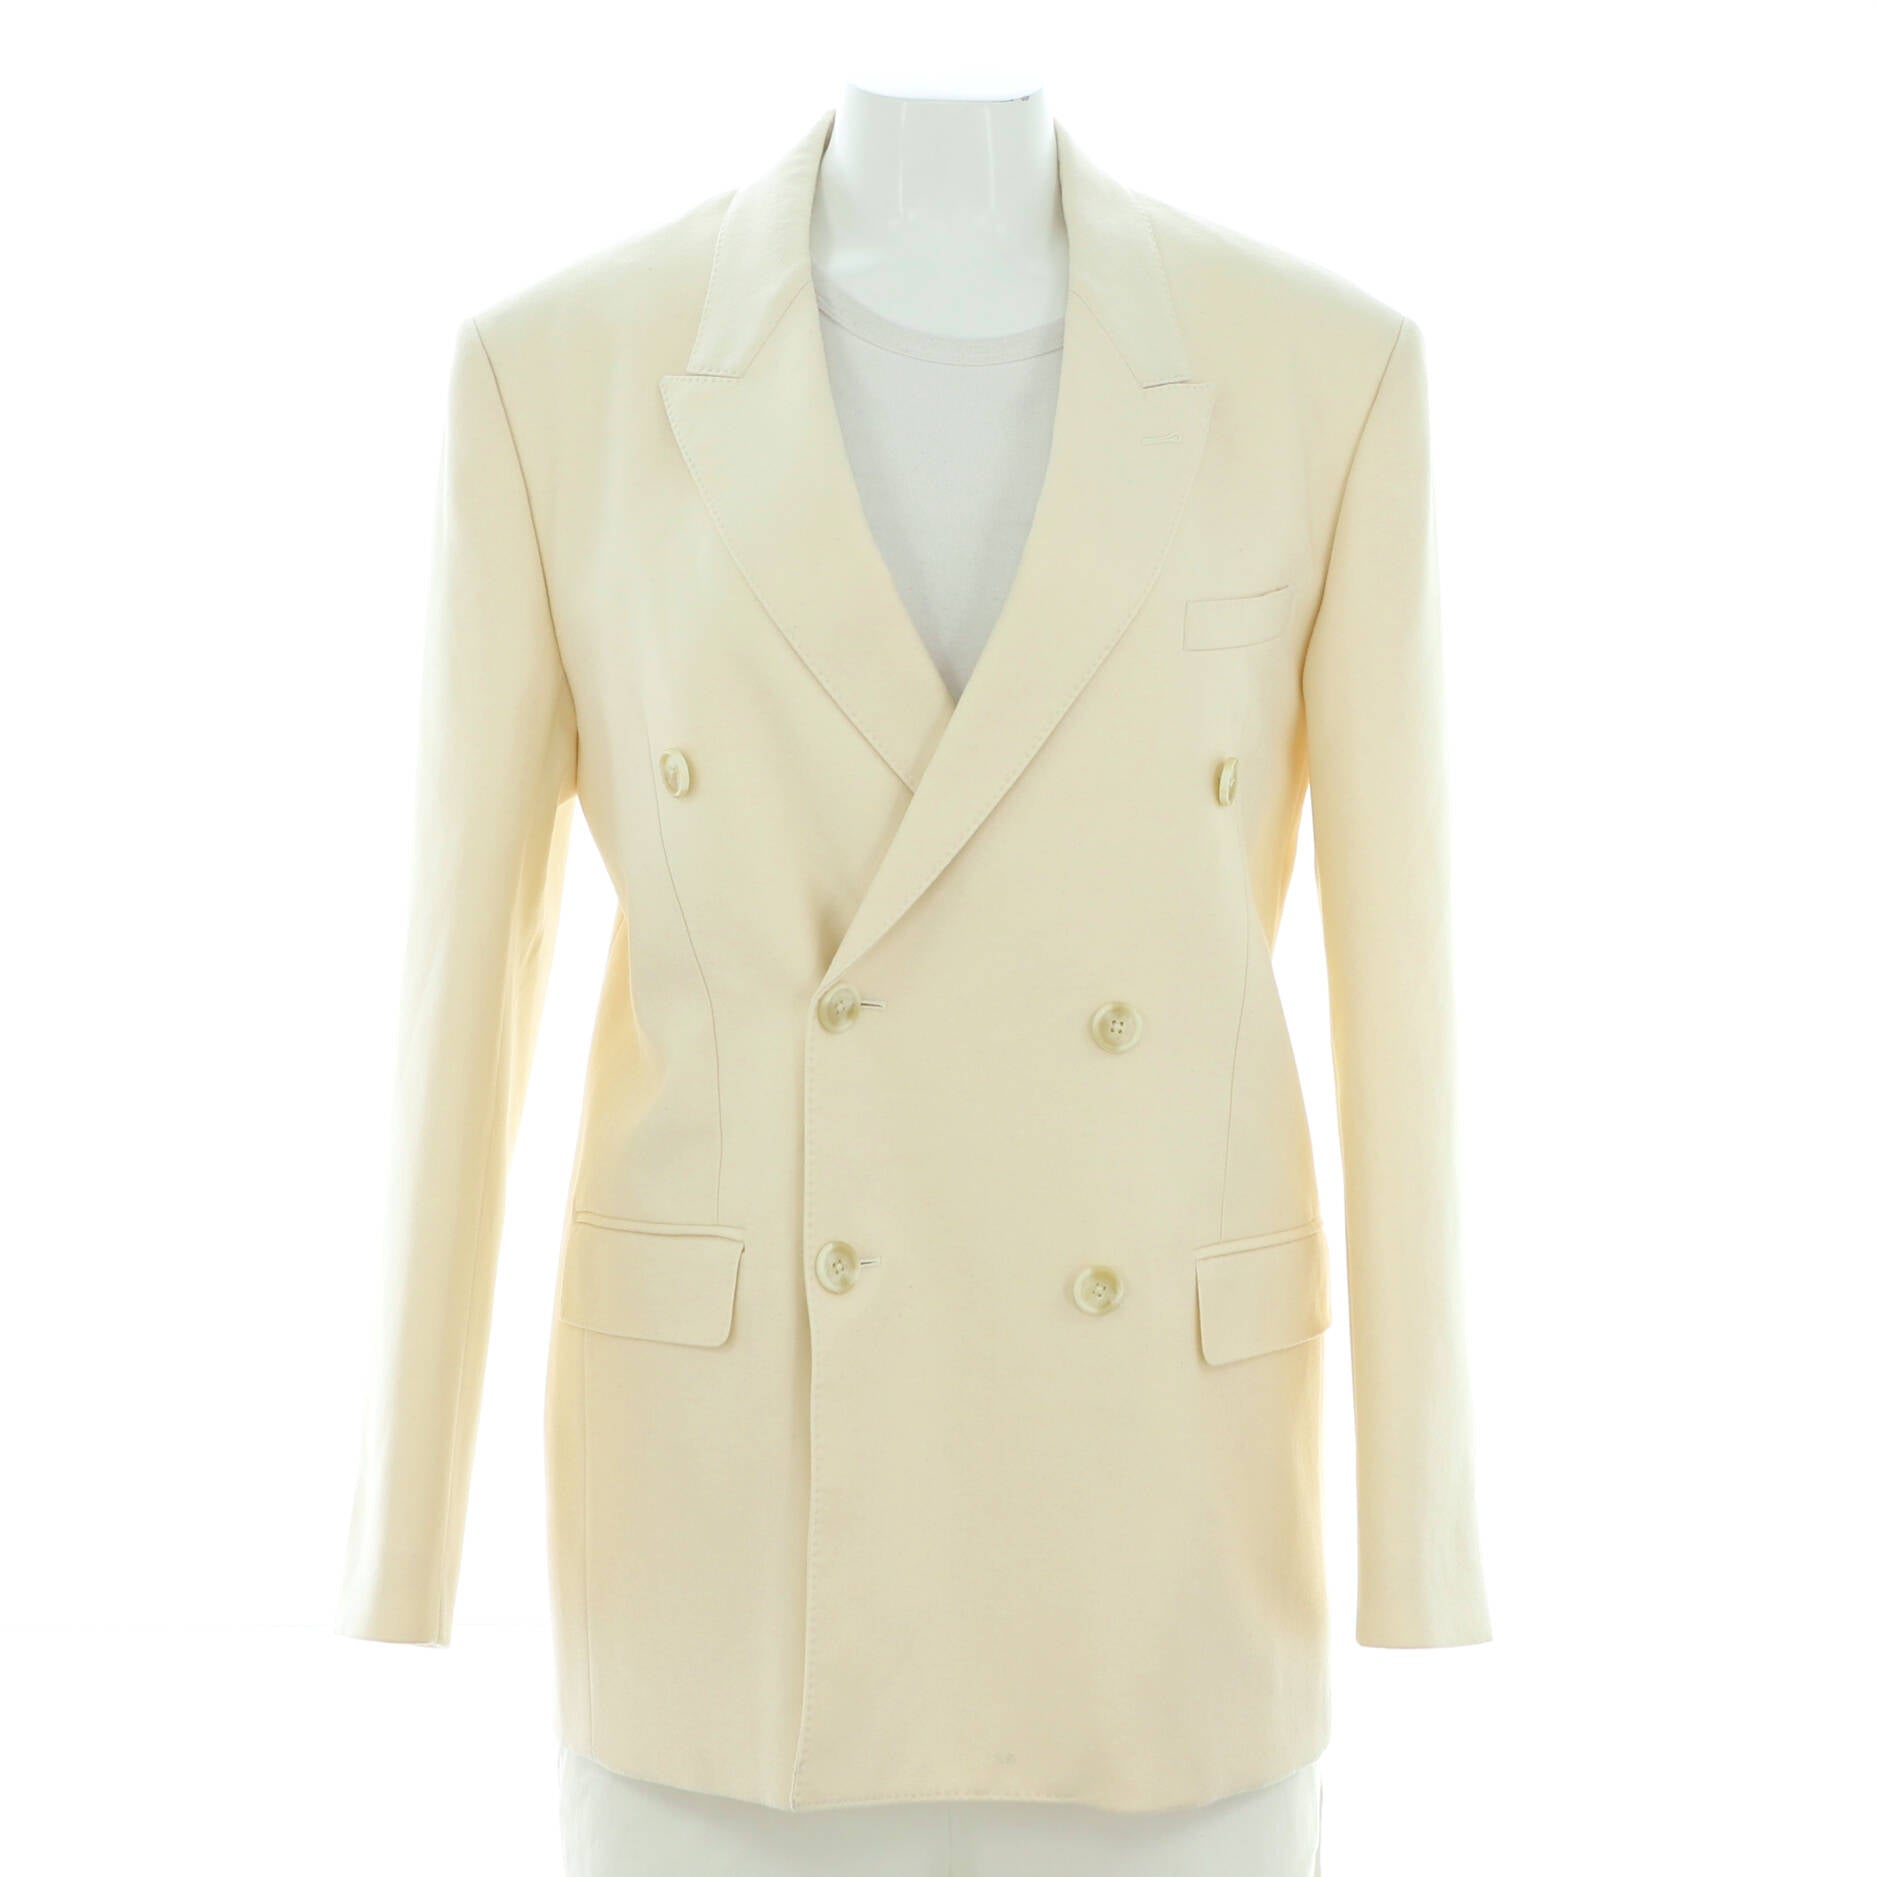 Women's Double Breasted Blazer Cashmere